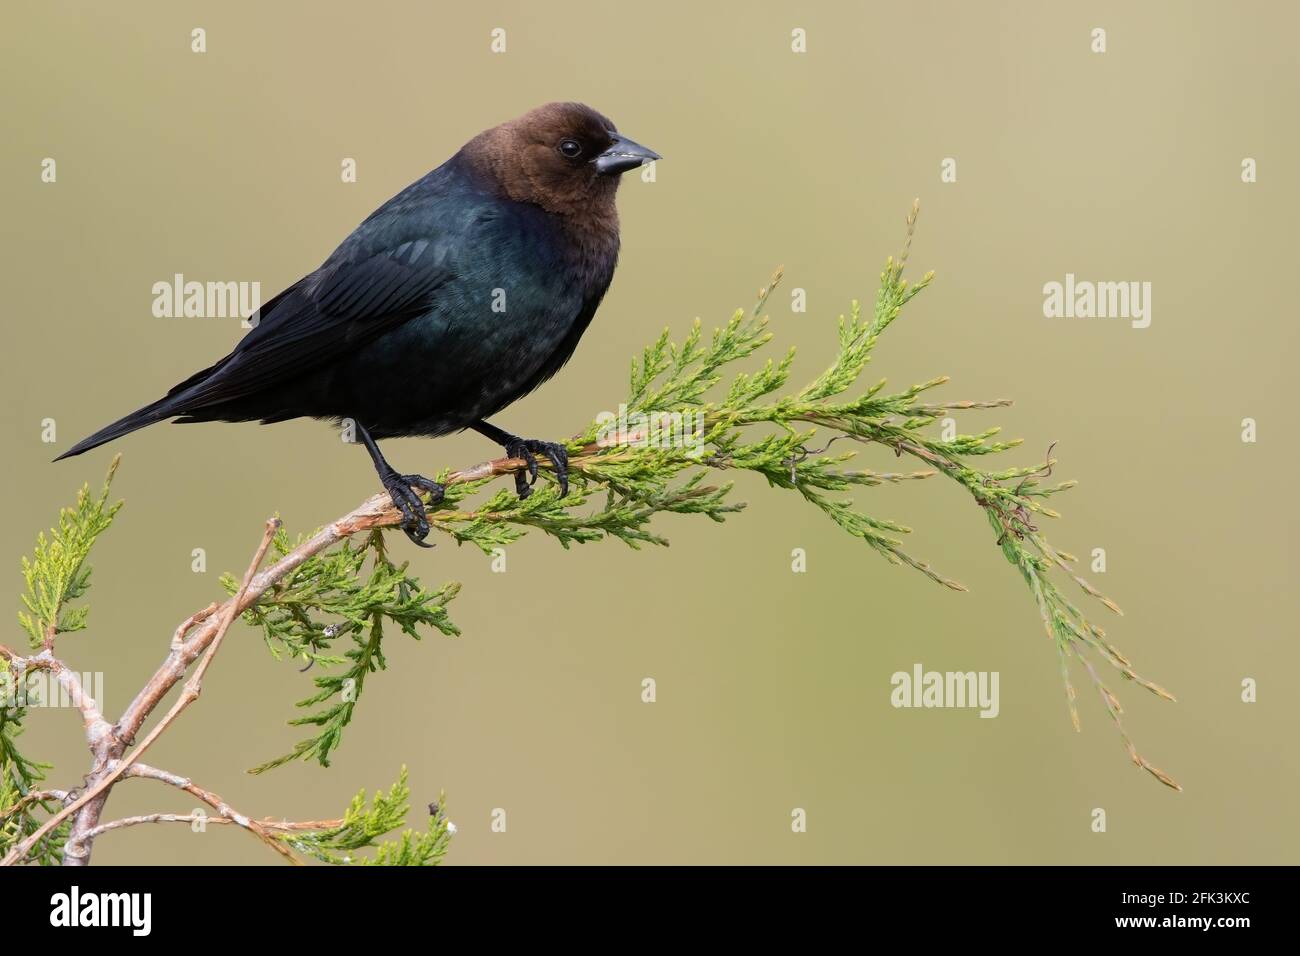 Brown-headed Cowbird (Molothrus ater) perched on a branch Stock Photo